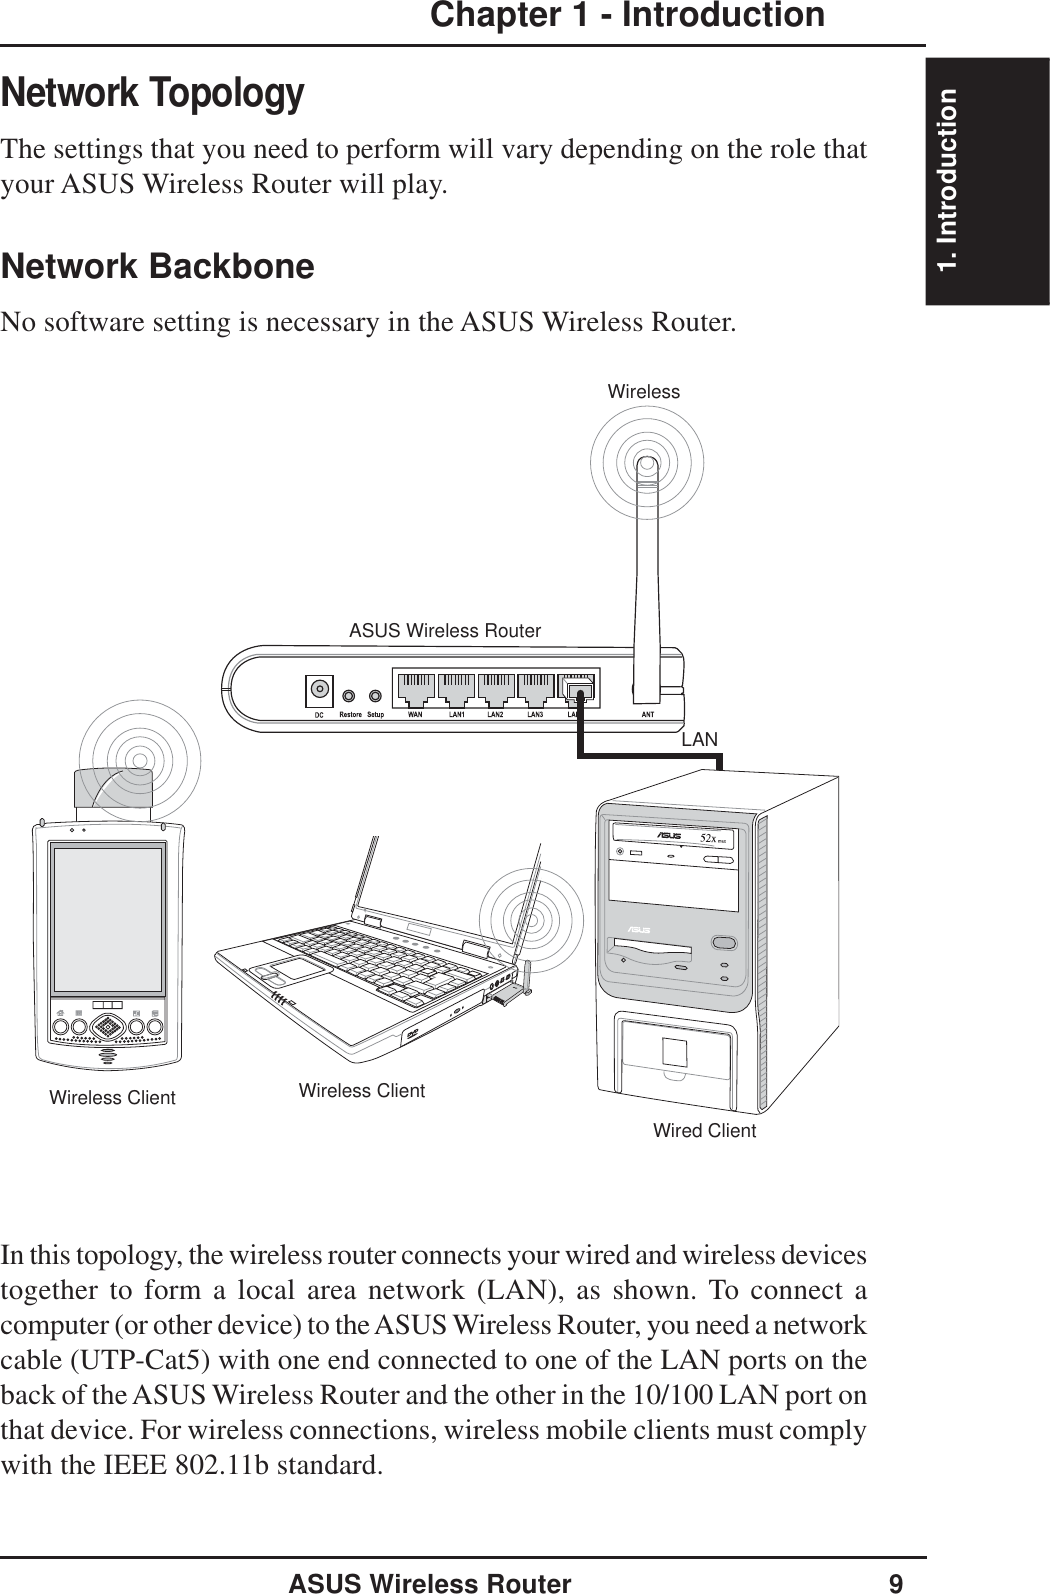 1. IntroductionASUS Wireless Router 9Chapter 1 - IntroductionWireless ClientWireless ClientASUS Wireless RouterLANWirelessWired ClientNetwork TopologyThe settings that you need to perform will vary depending on the role thatyour ASUS Wireless Router will play.Network BackboneNo software setting is necessary in the ASUS Wireless Router.In this topology, the wireless router connects your wired and wireless devicestogether to form a local area network (LAN), as shown. To connect acomputer (or other device) to the ASUS Wireless Router, you need a networkcable (UTP-Cat5) with one end connected to one of the LAN ports on theback of the ASUS Wireless Router and the other in the 10/100 LAN port onthat device. For wireless connections, wireless mobile clients must complywith the IEEE 802.11b standard.